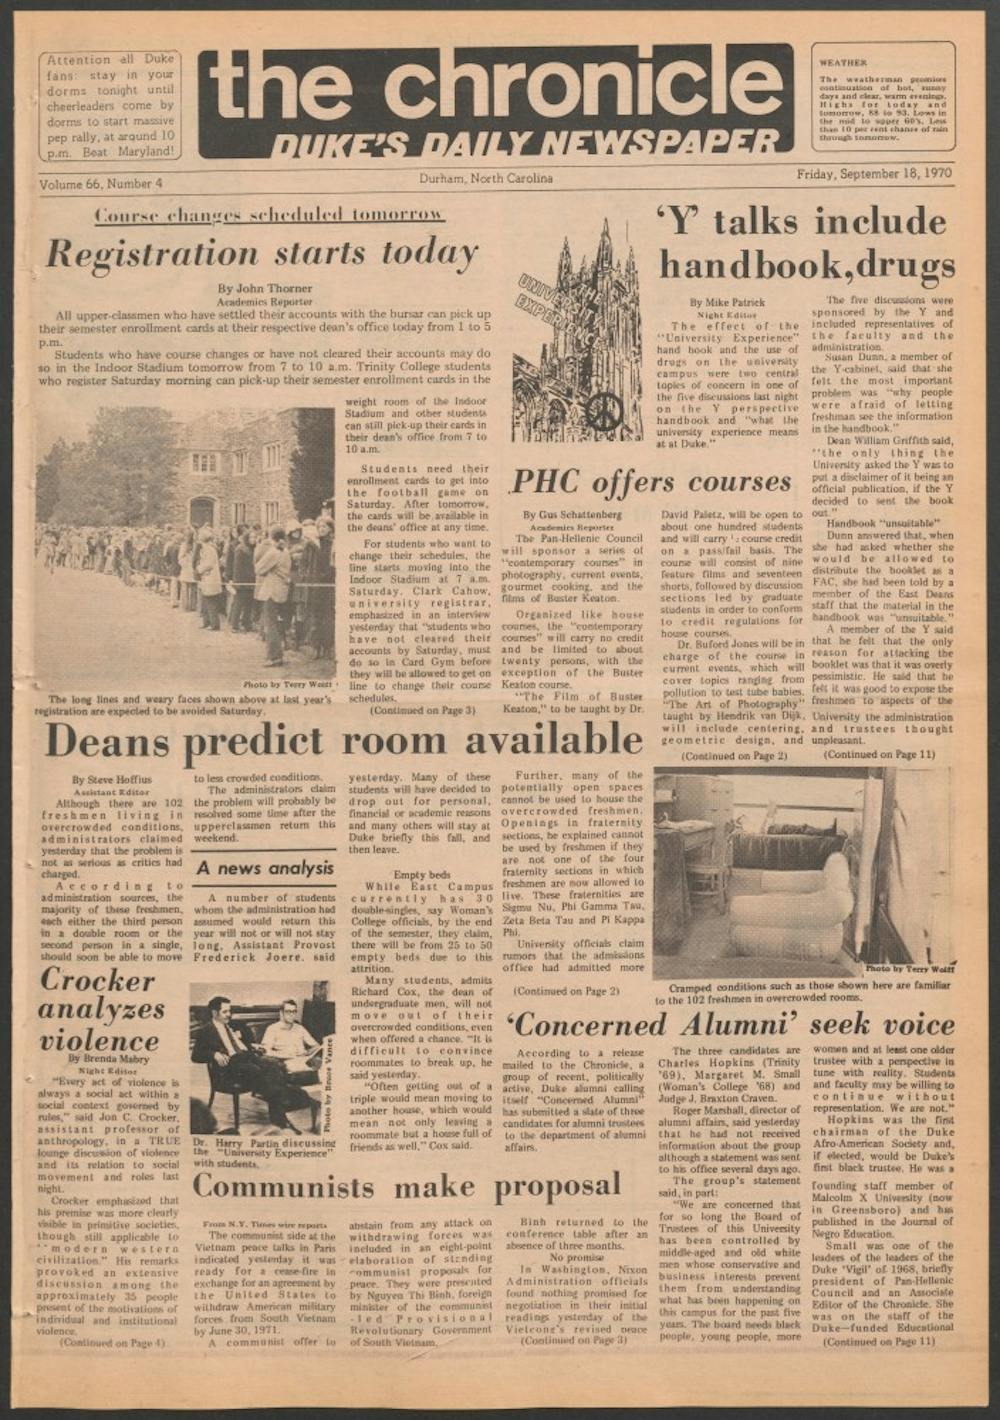 <p>A small note in the top right corner of the Sept. 18, 1970, issue of The Chronicle provided interesting details about an upcoming pep rally.</p>